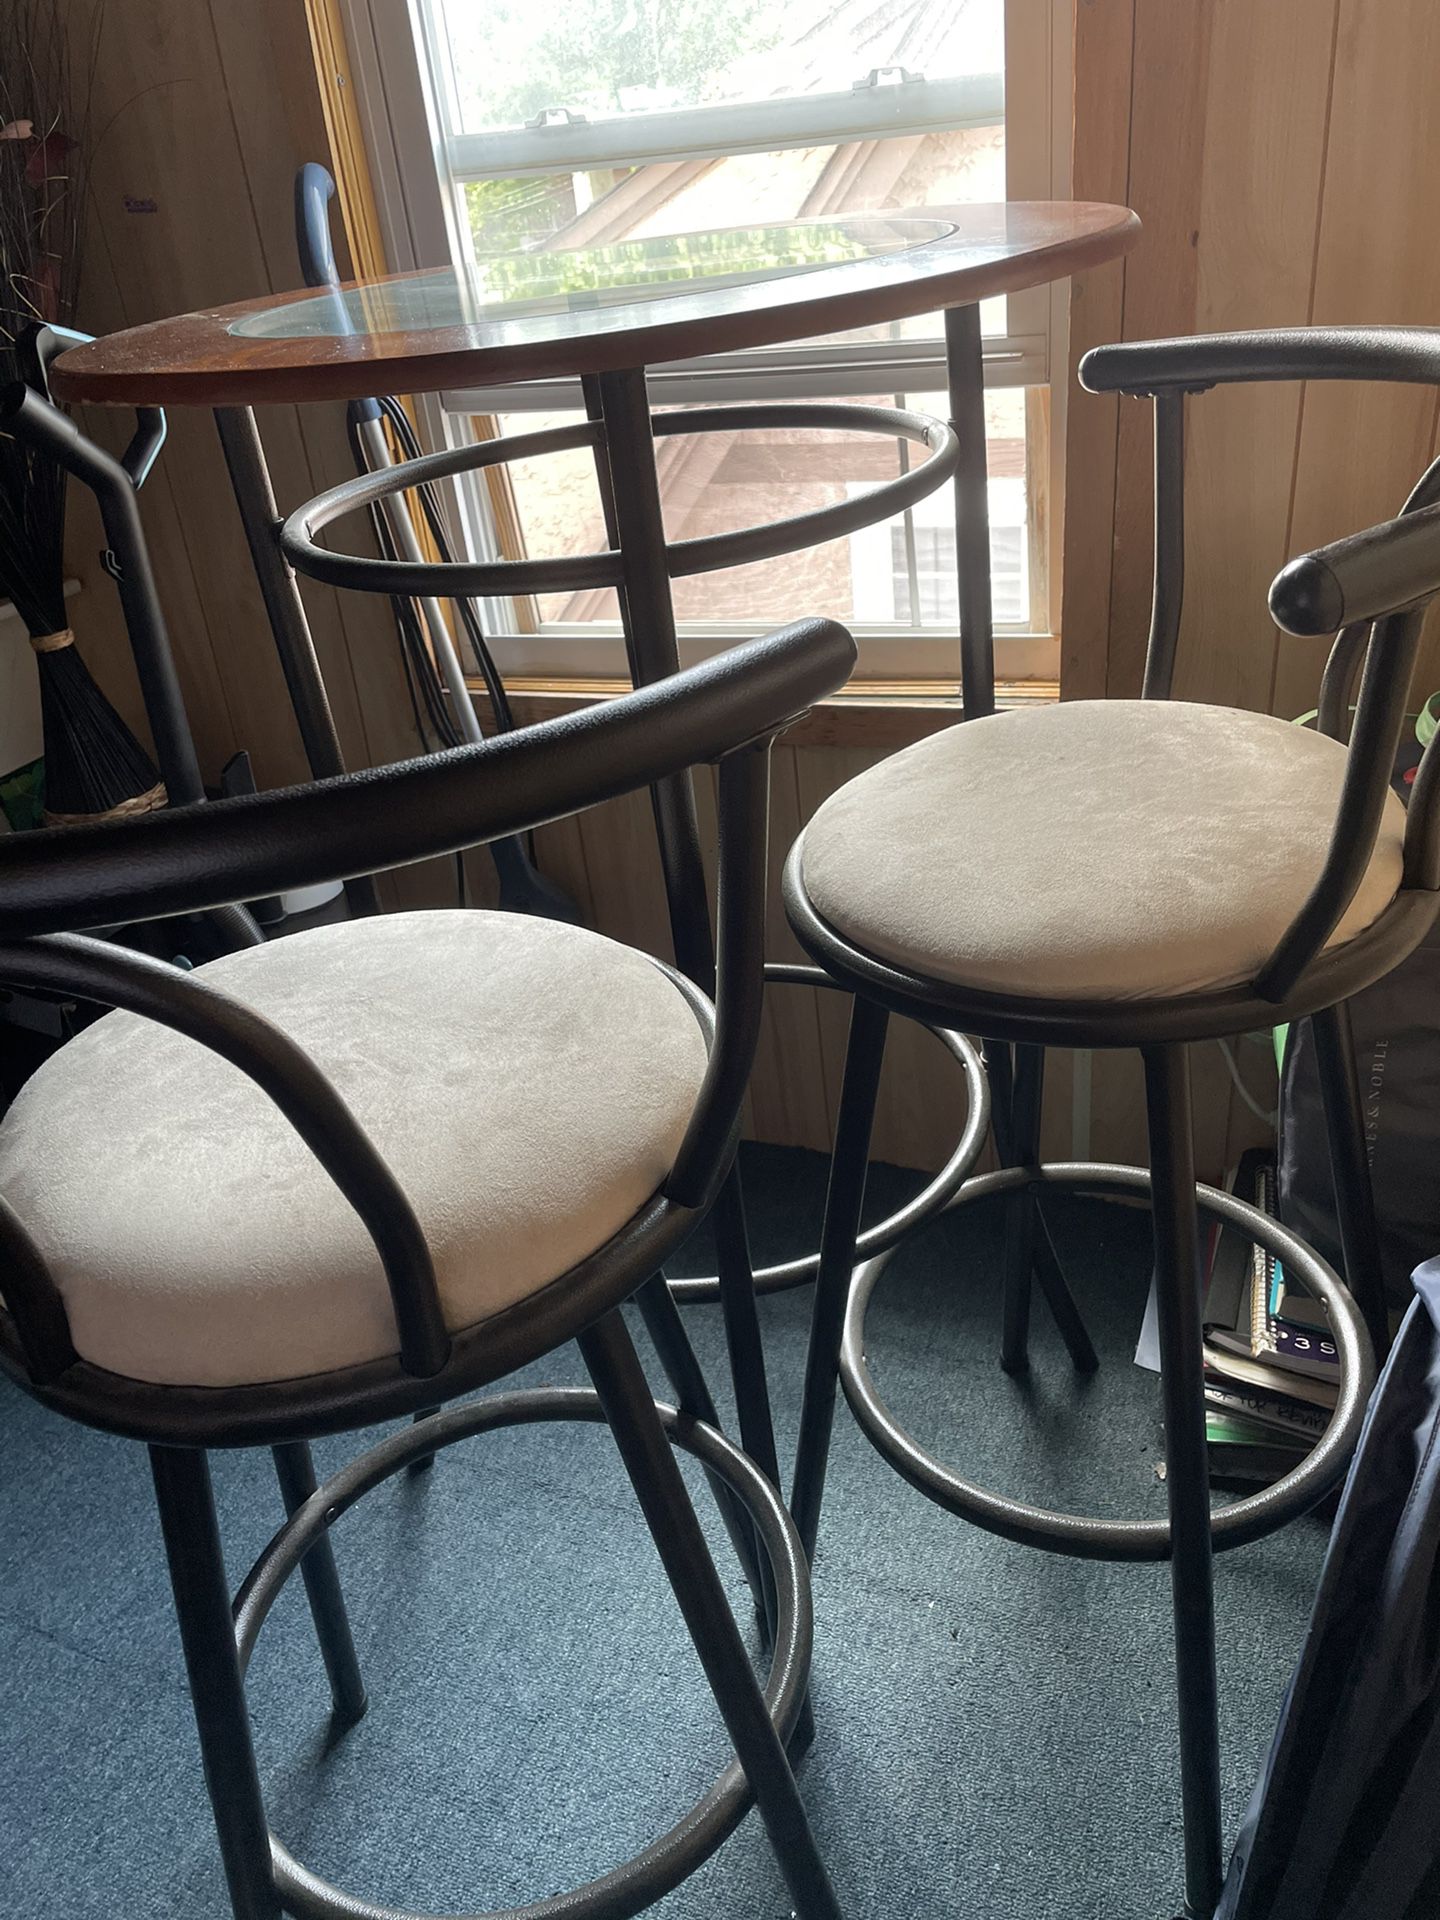 Bistro Table With Chairs